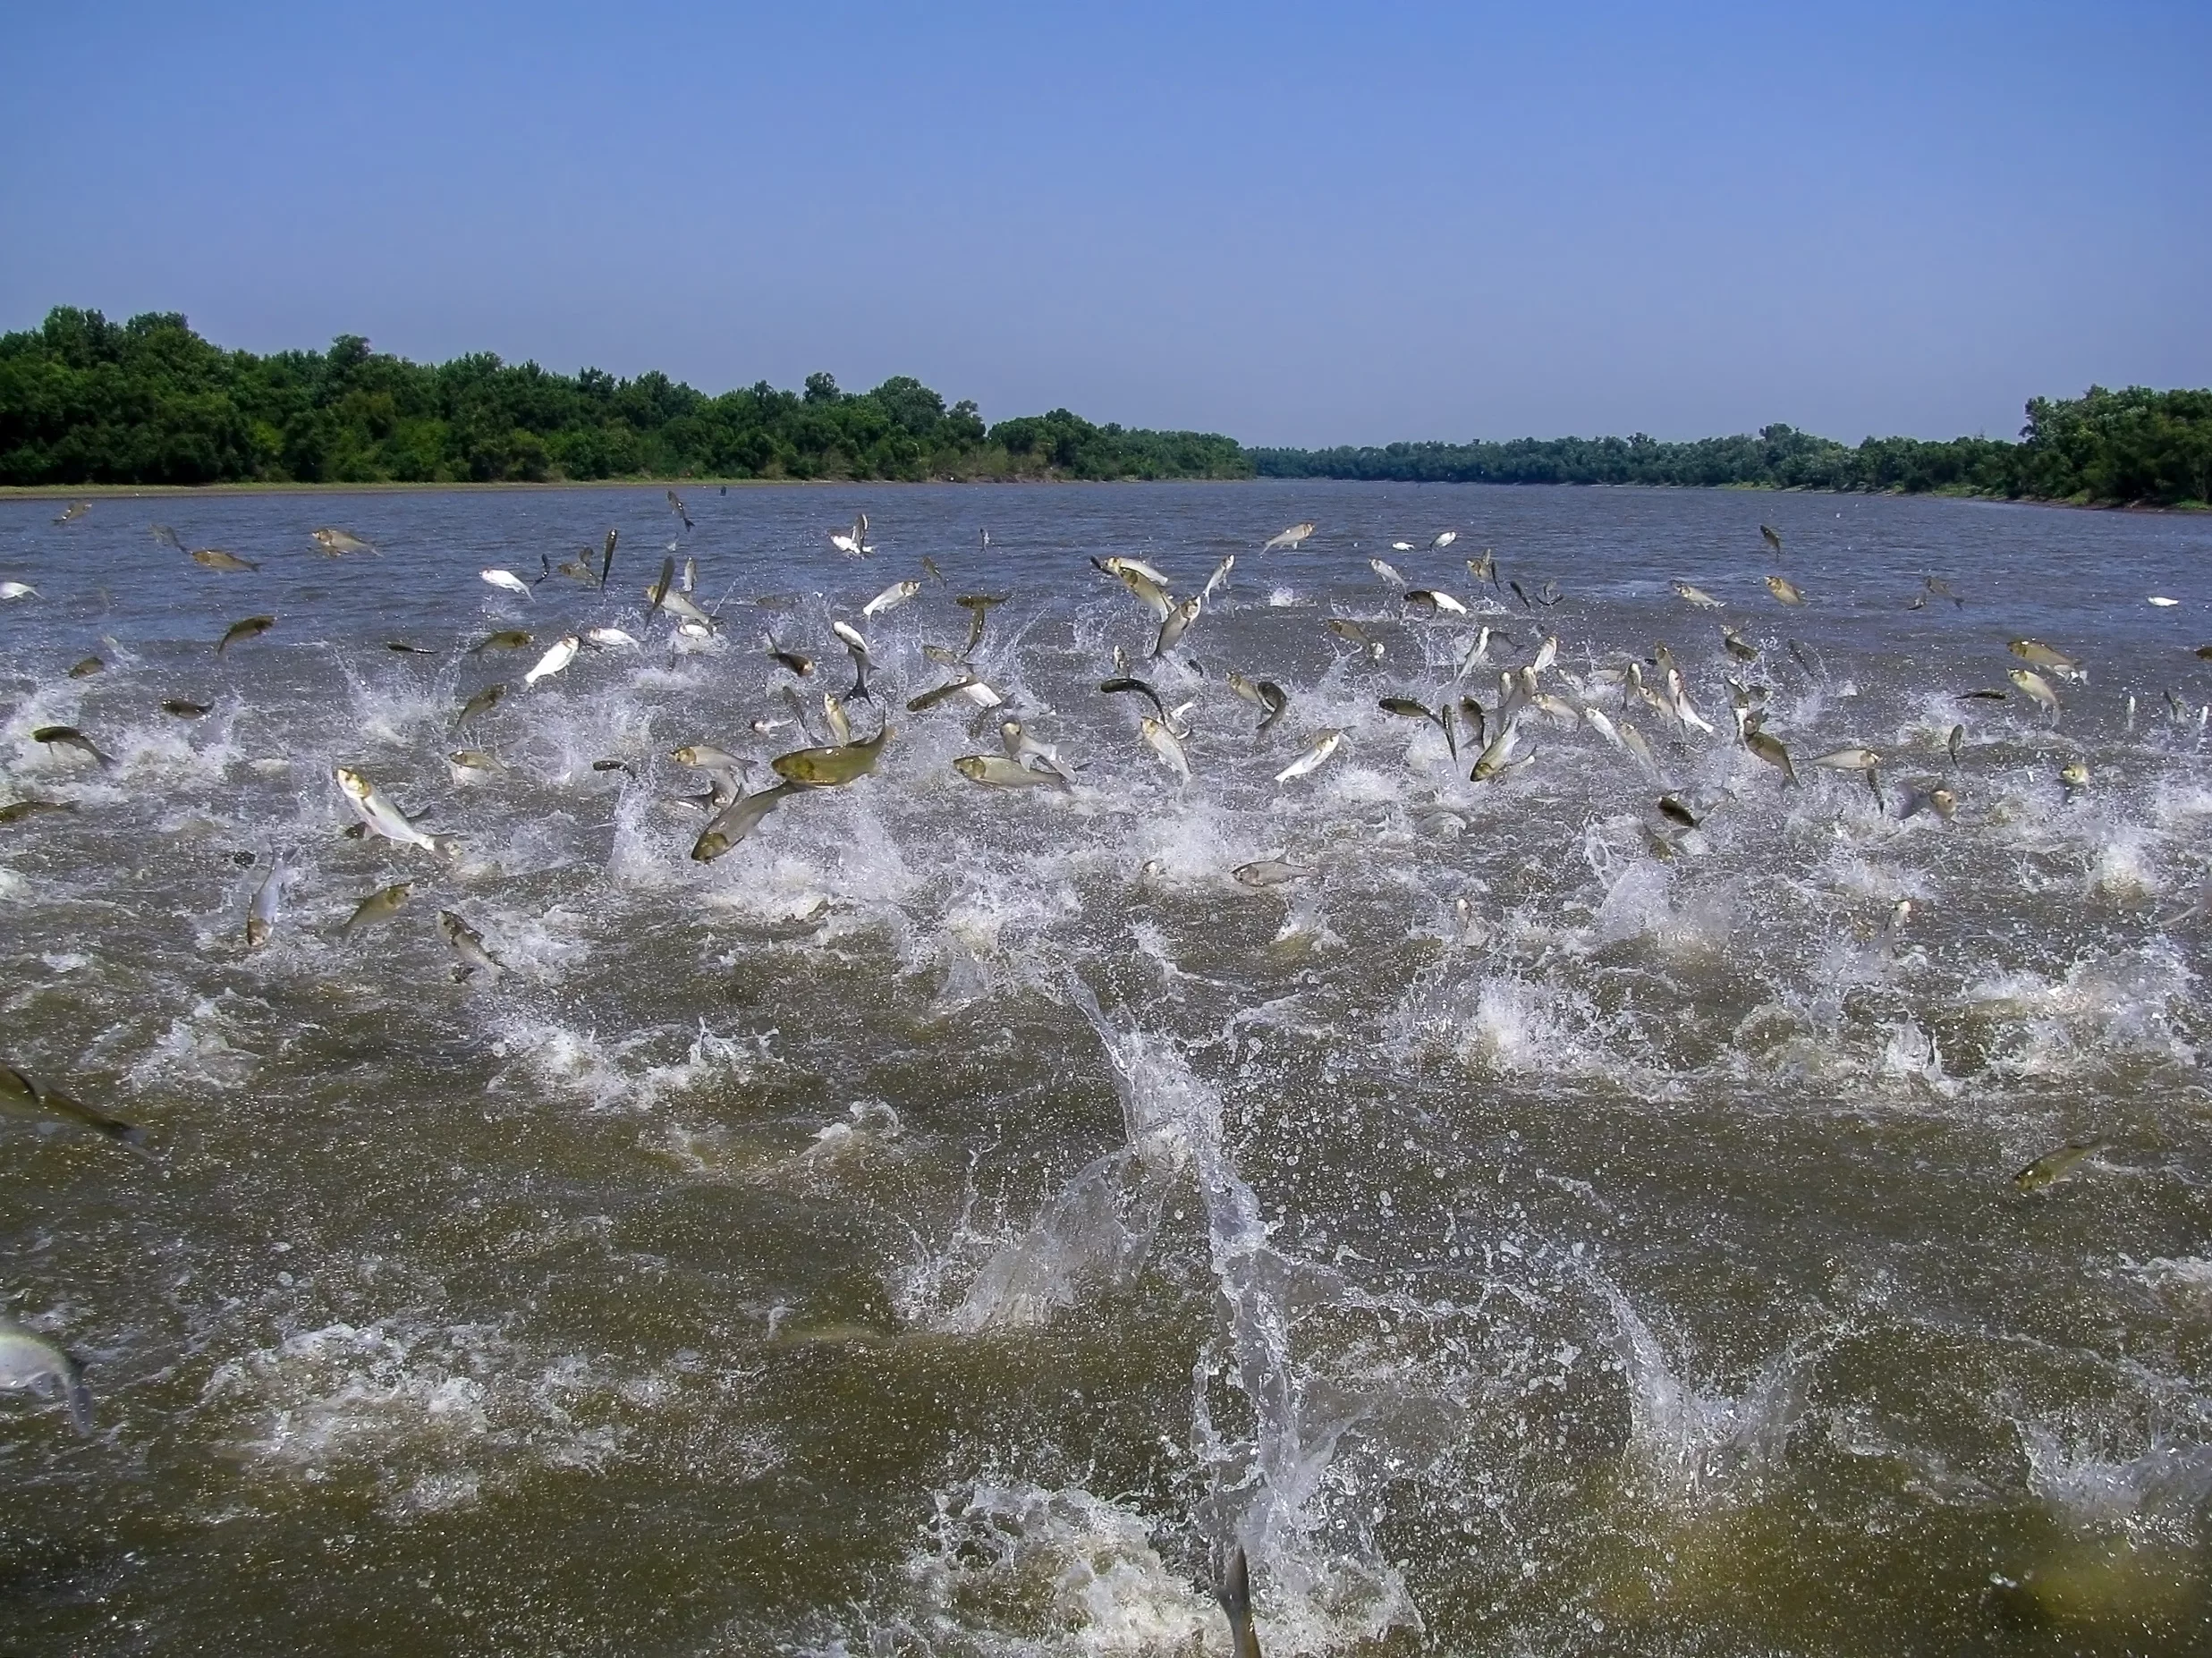 Committee learns more about invasive carp in Kentucky